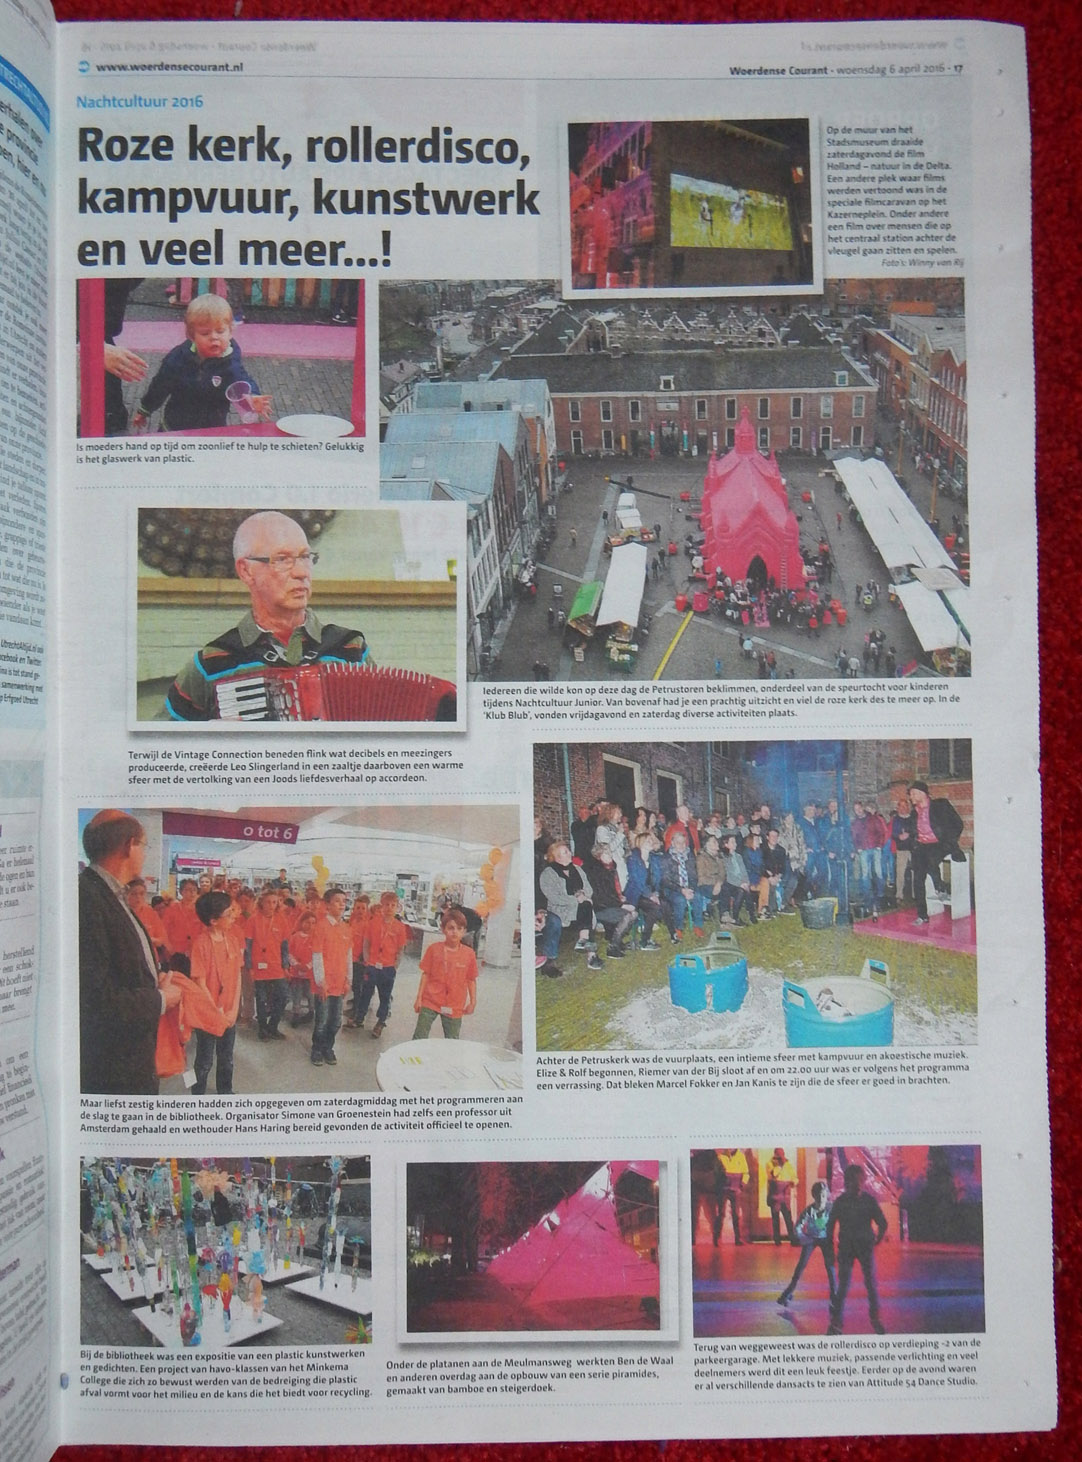 woerdense-courant-2016-04-06-1094-1082x1462